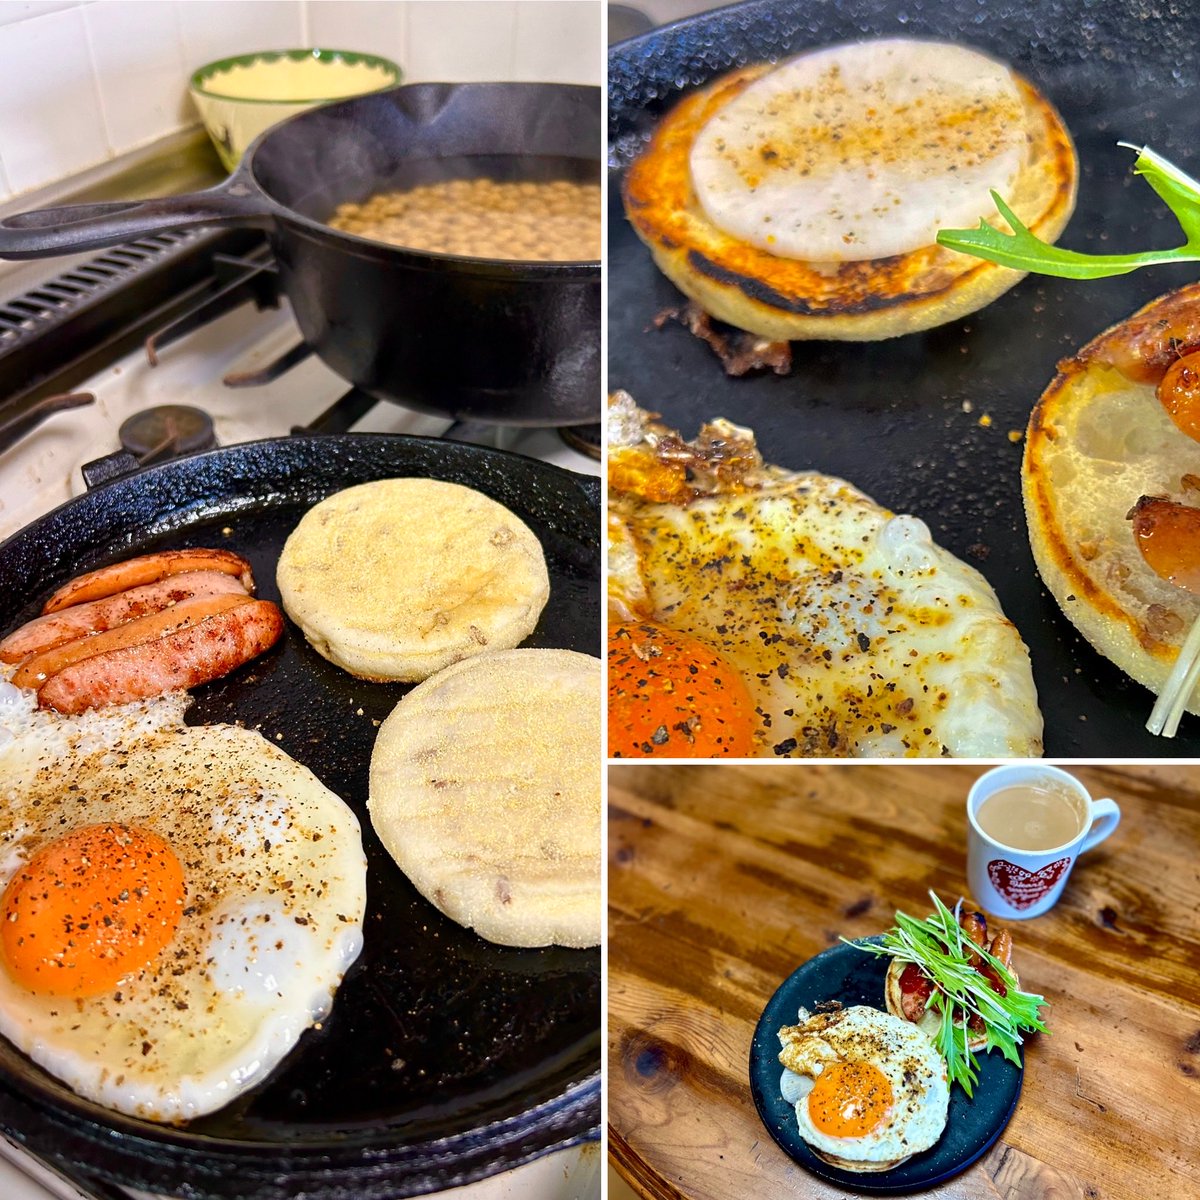 Lunch was an English muffin cooked in one cast iron, with a fried egg, sausage, and radish.

#lodgecombocookercover #lodgecombocooker #castiron #castironcooking #目玉焼き